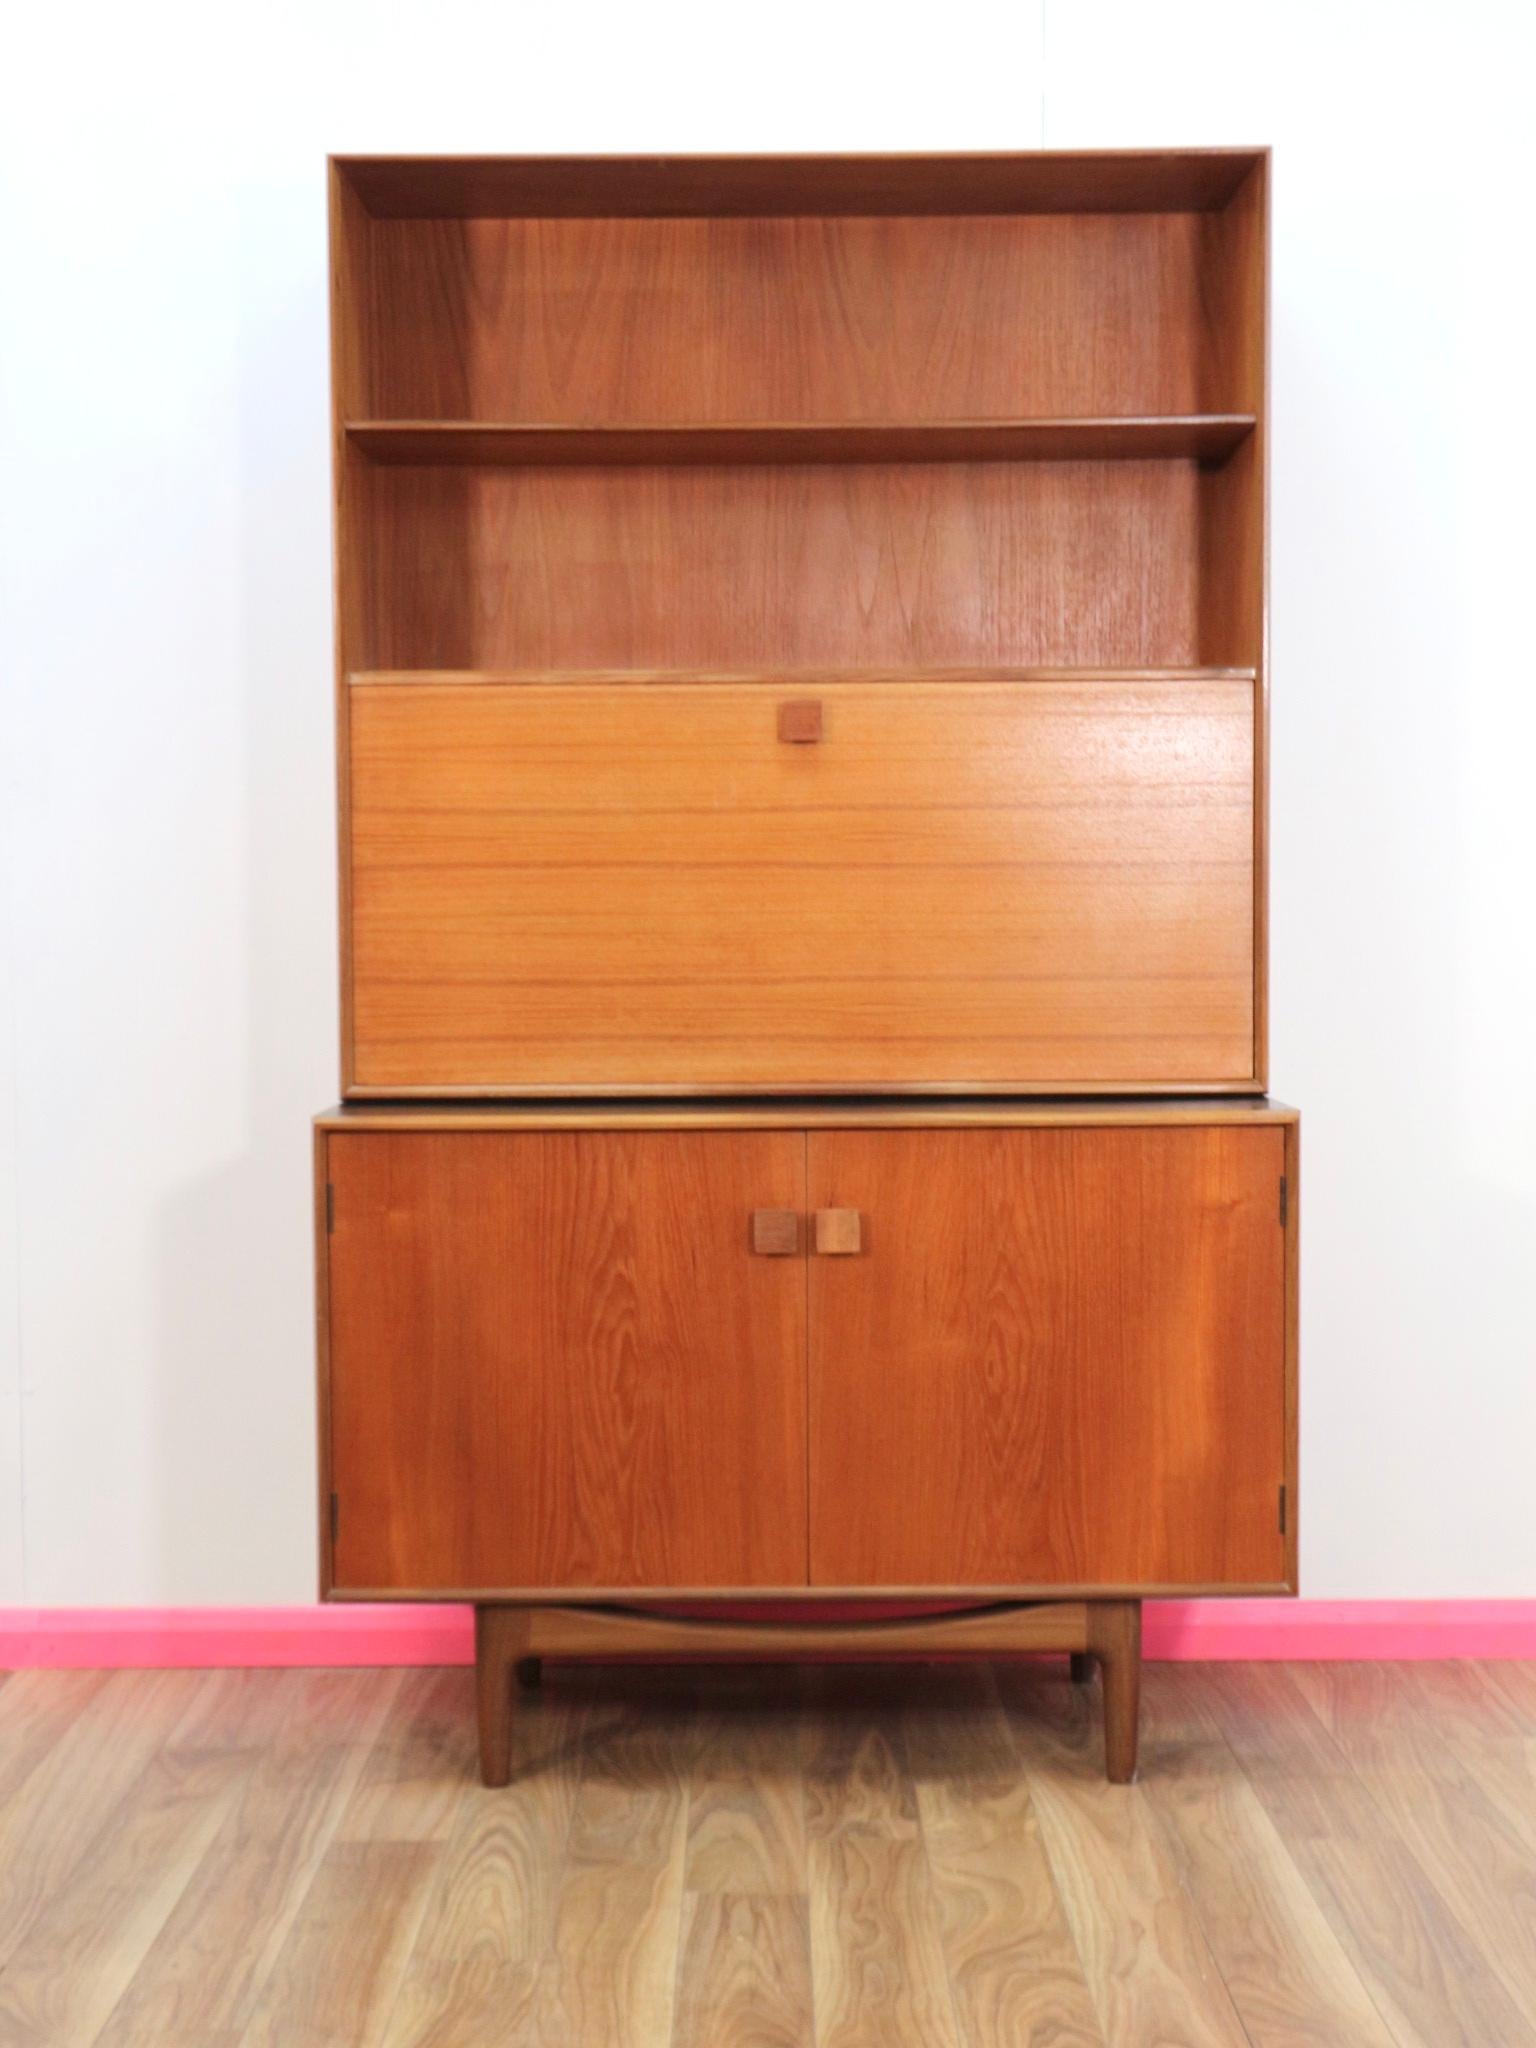 This gorgeous wall unit designed in the 1960's by Kofod Larsen for G Plan is a design classic. It offers great storage but will fit in to a small space whilst still looking stunning. A special mention to the rosewood square handles which set the